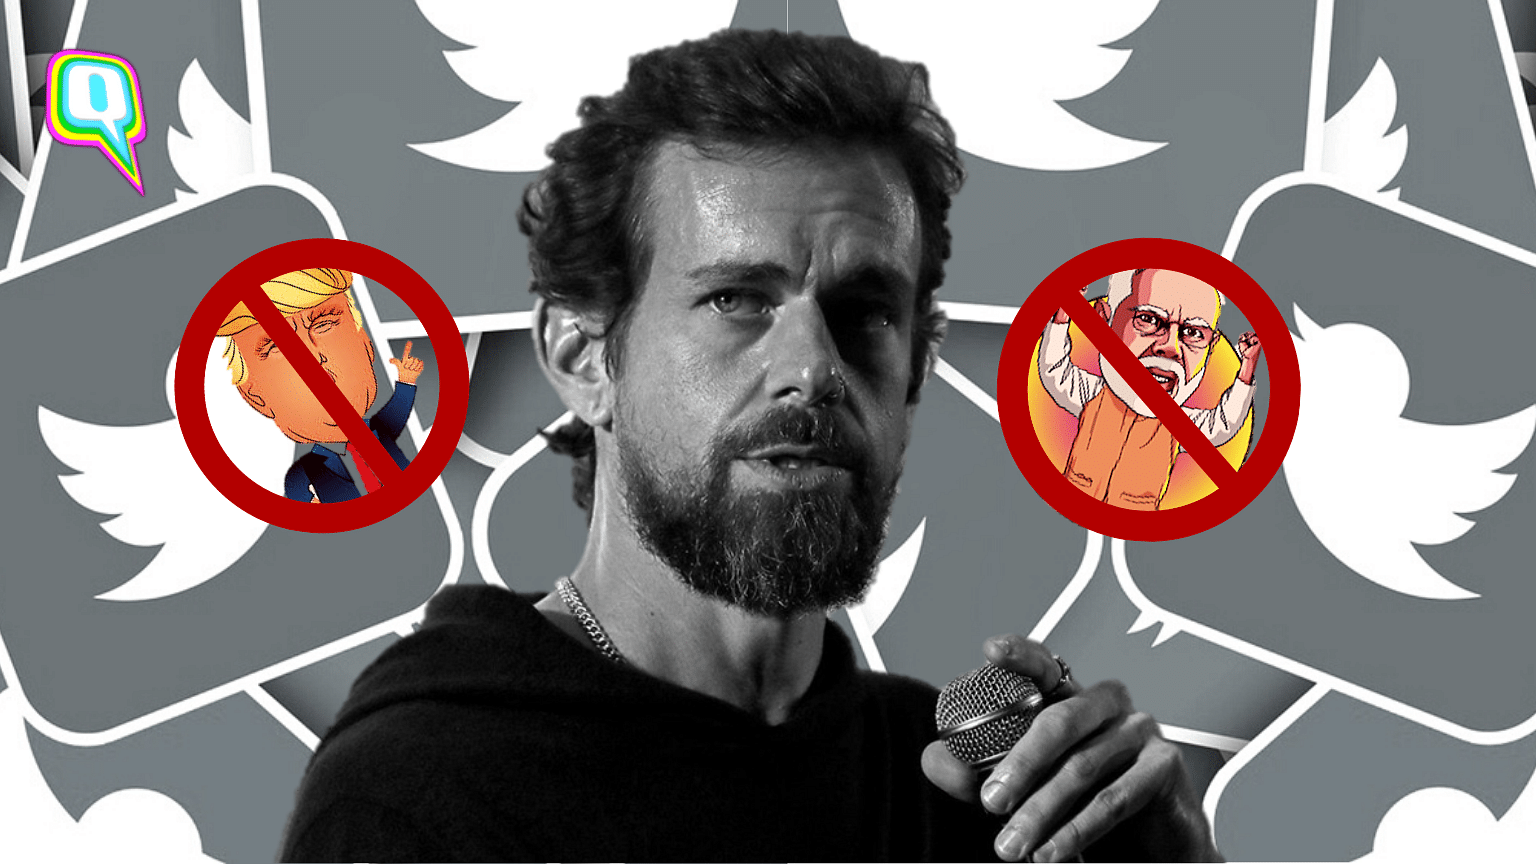 Twitter CEO Jack Dorsey recently announced that Twitter will be banning all political advertisements from the platform.